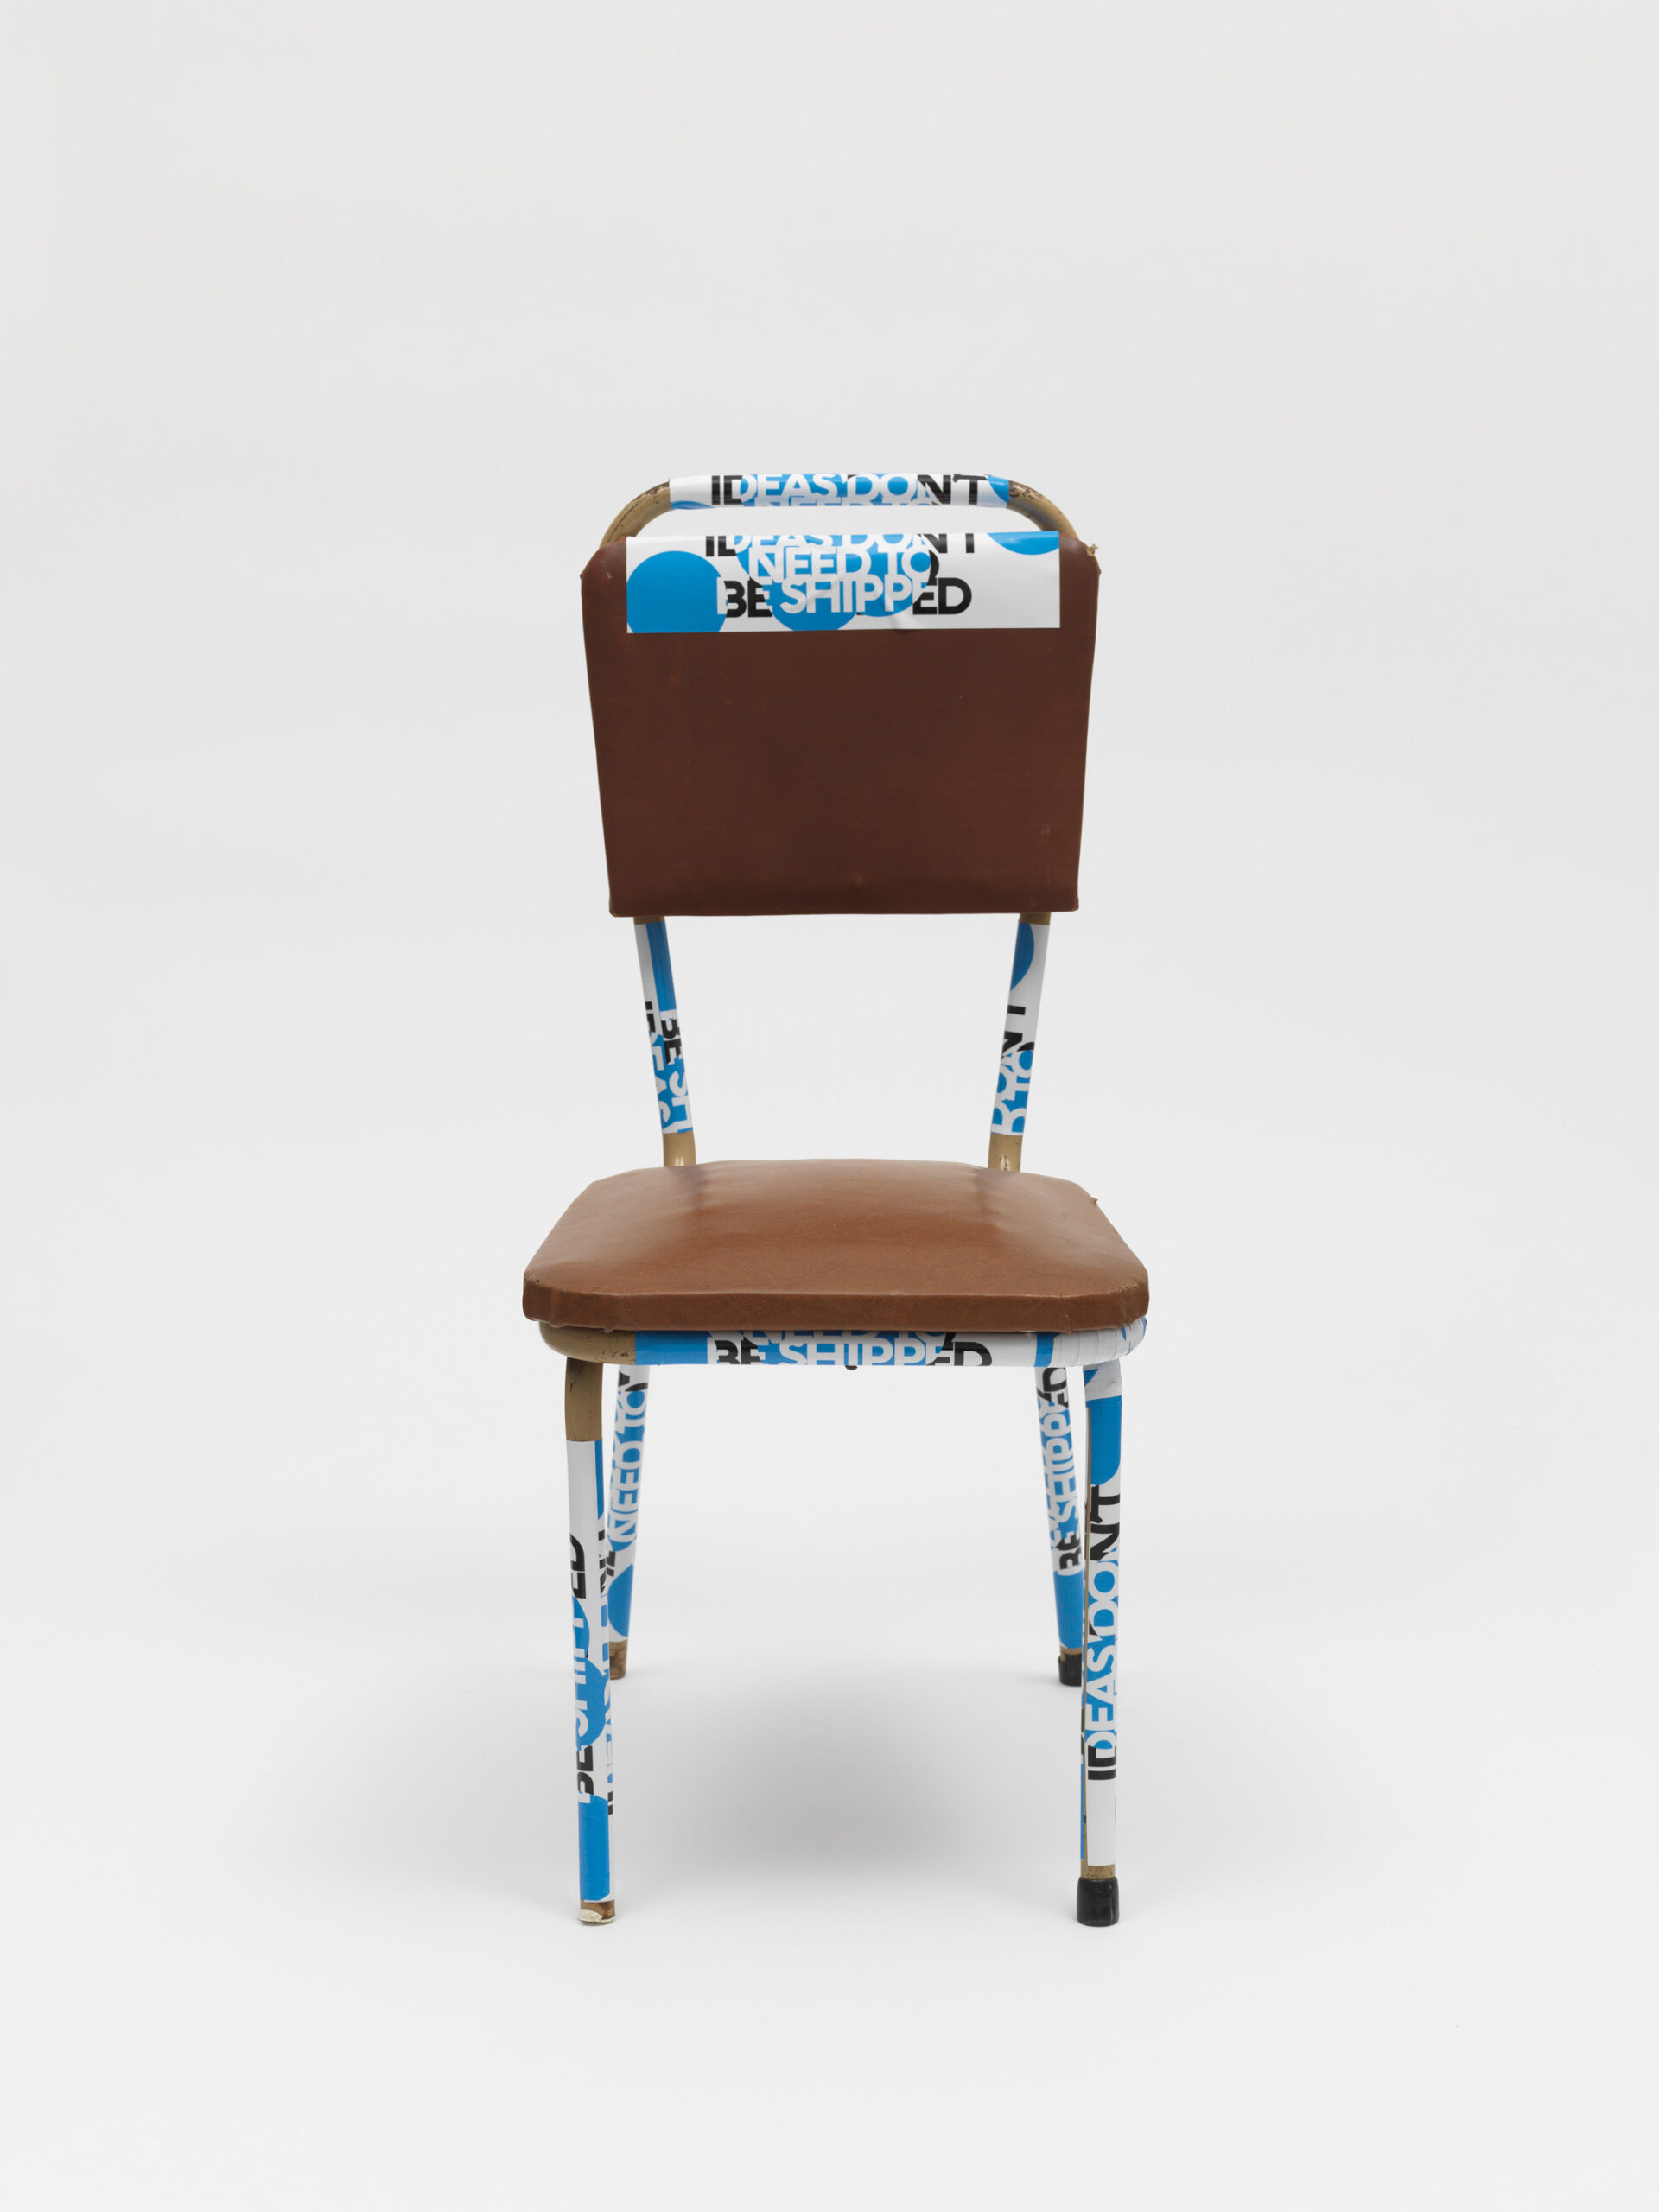 Product image: Tubular Chair, modified by Evi & Finn, claim stickers, 2022 Athens, 4.6 tons